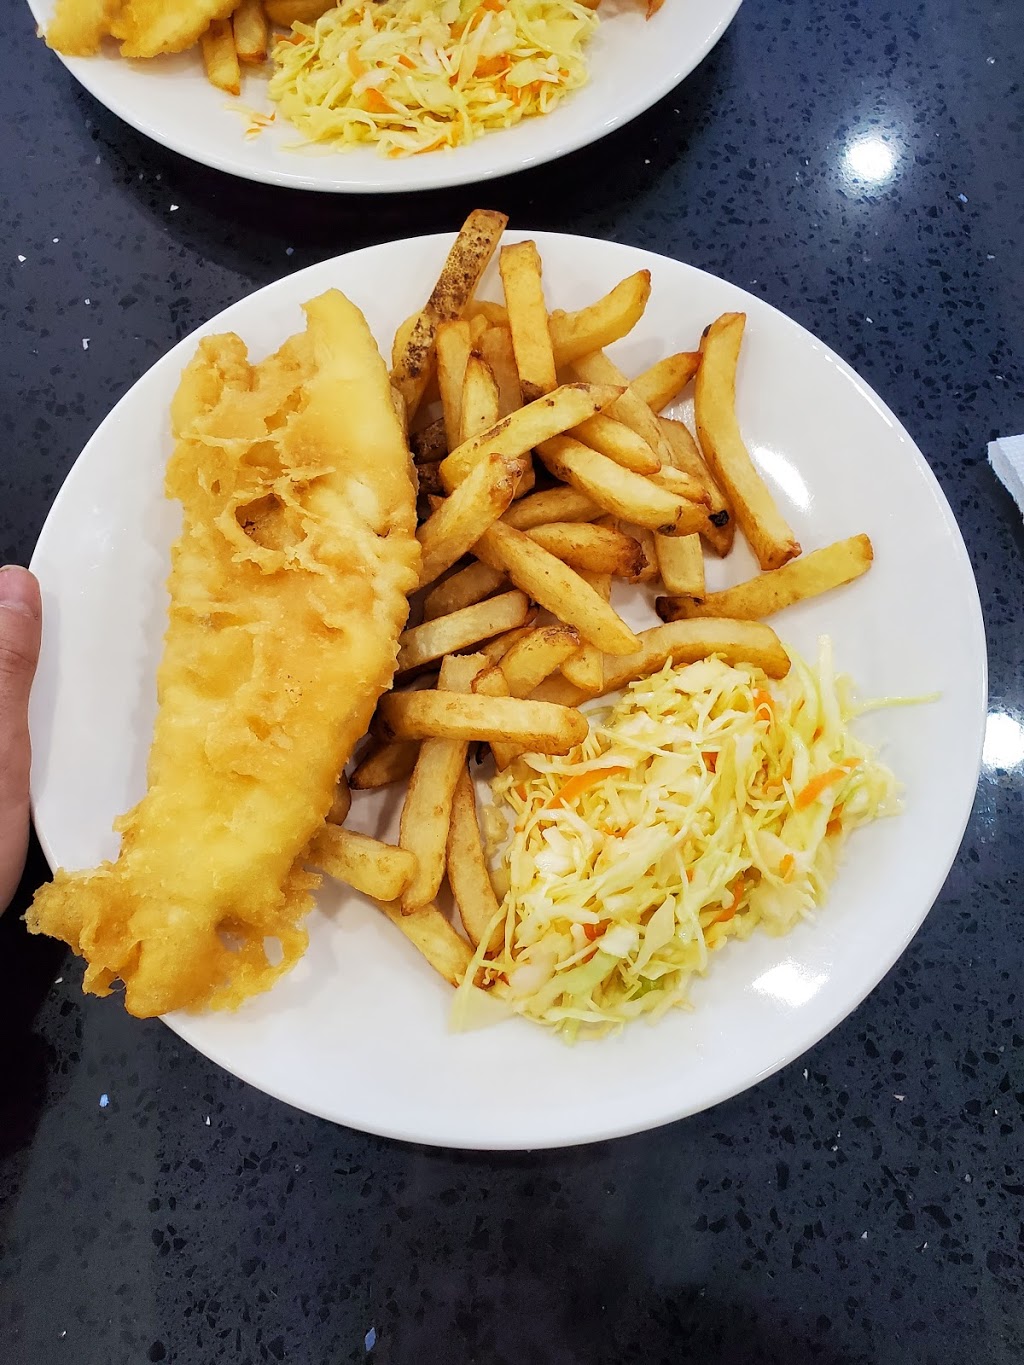 Halibut House Fish and Chips | restaurant | 300 King George Rd, Brantford, ON N3R 5M1, Canada | 5193043331 OR +1 519-304-3331